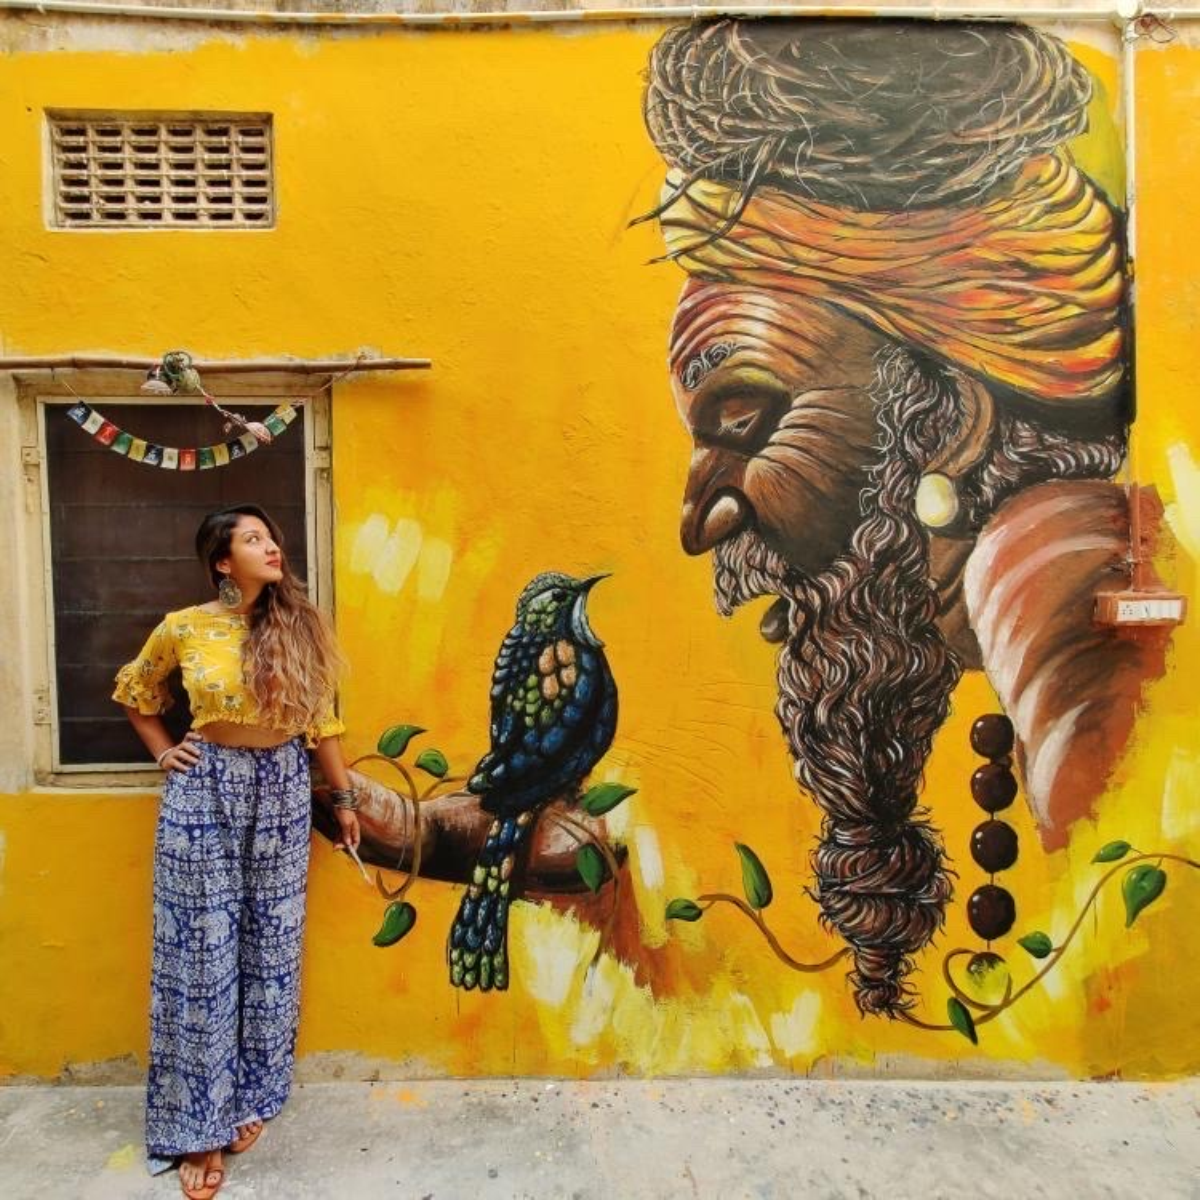 Sneha Chakraborty posing with her artwork. Artists like Sneha are fast gaining a following in the crypto space./Photos courtesy of Sneha Chakraborty